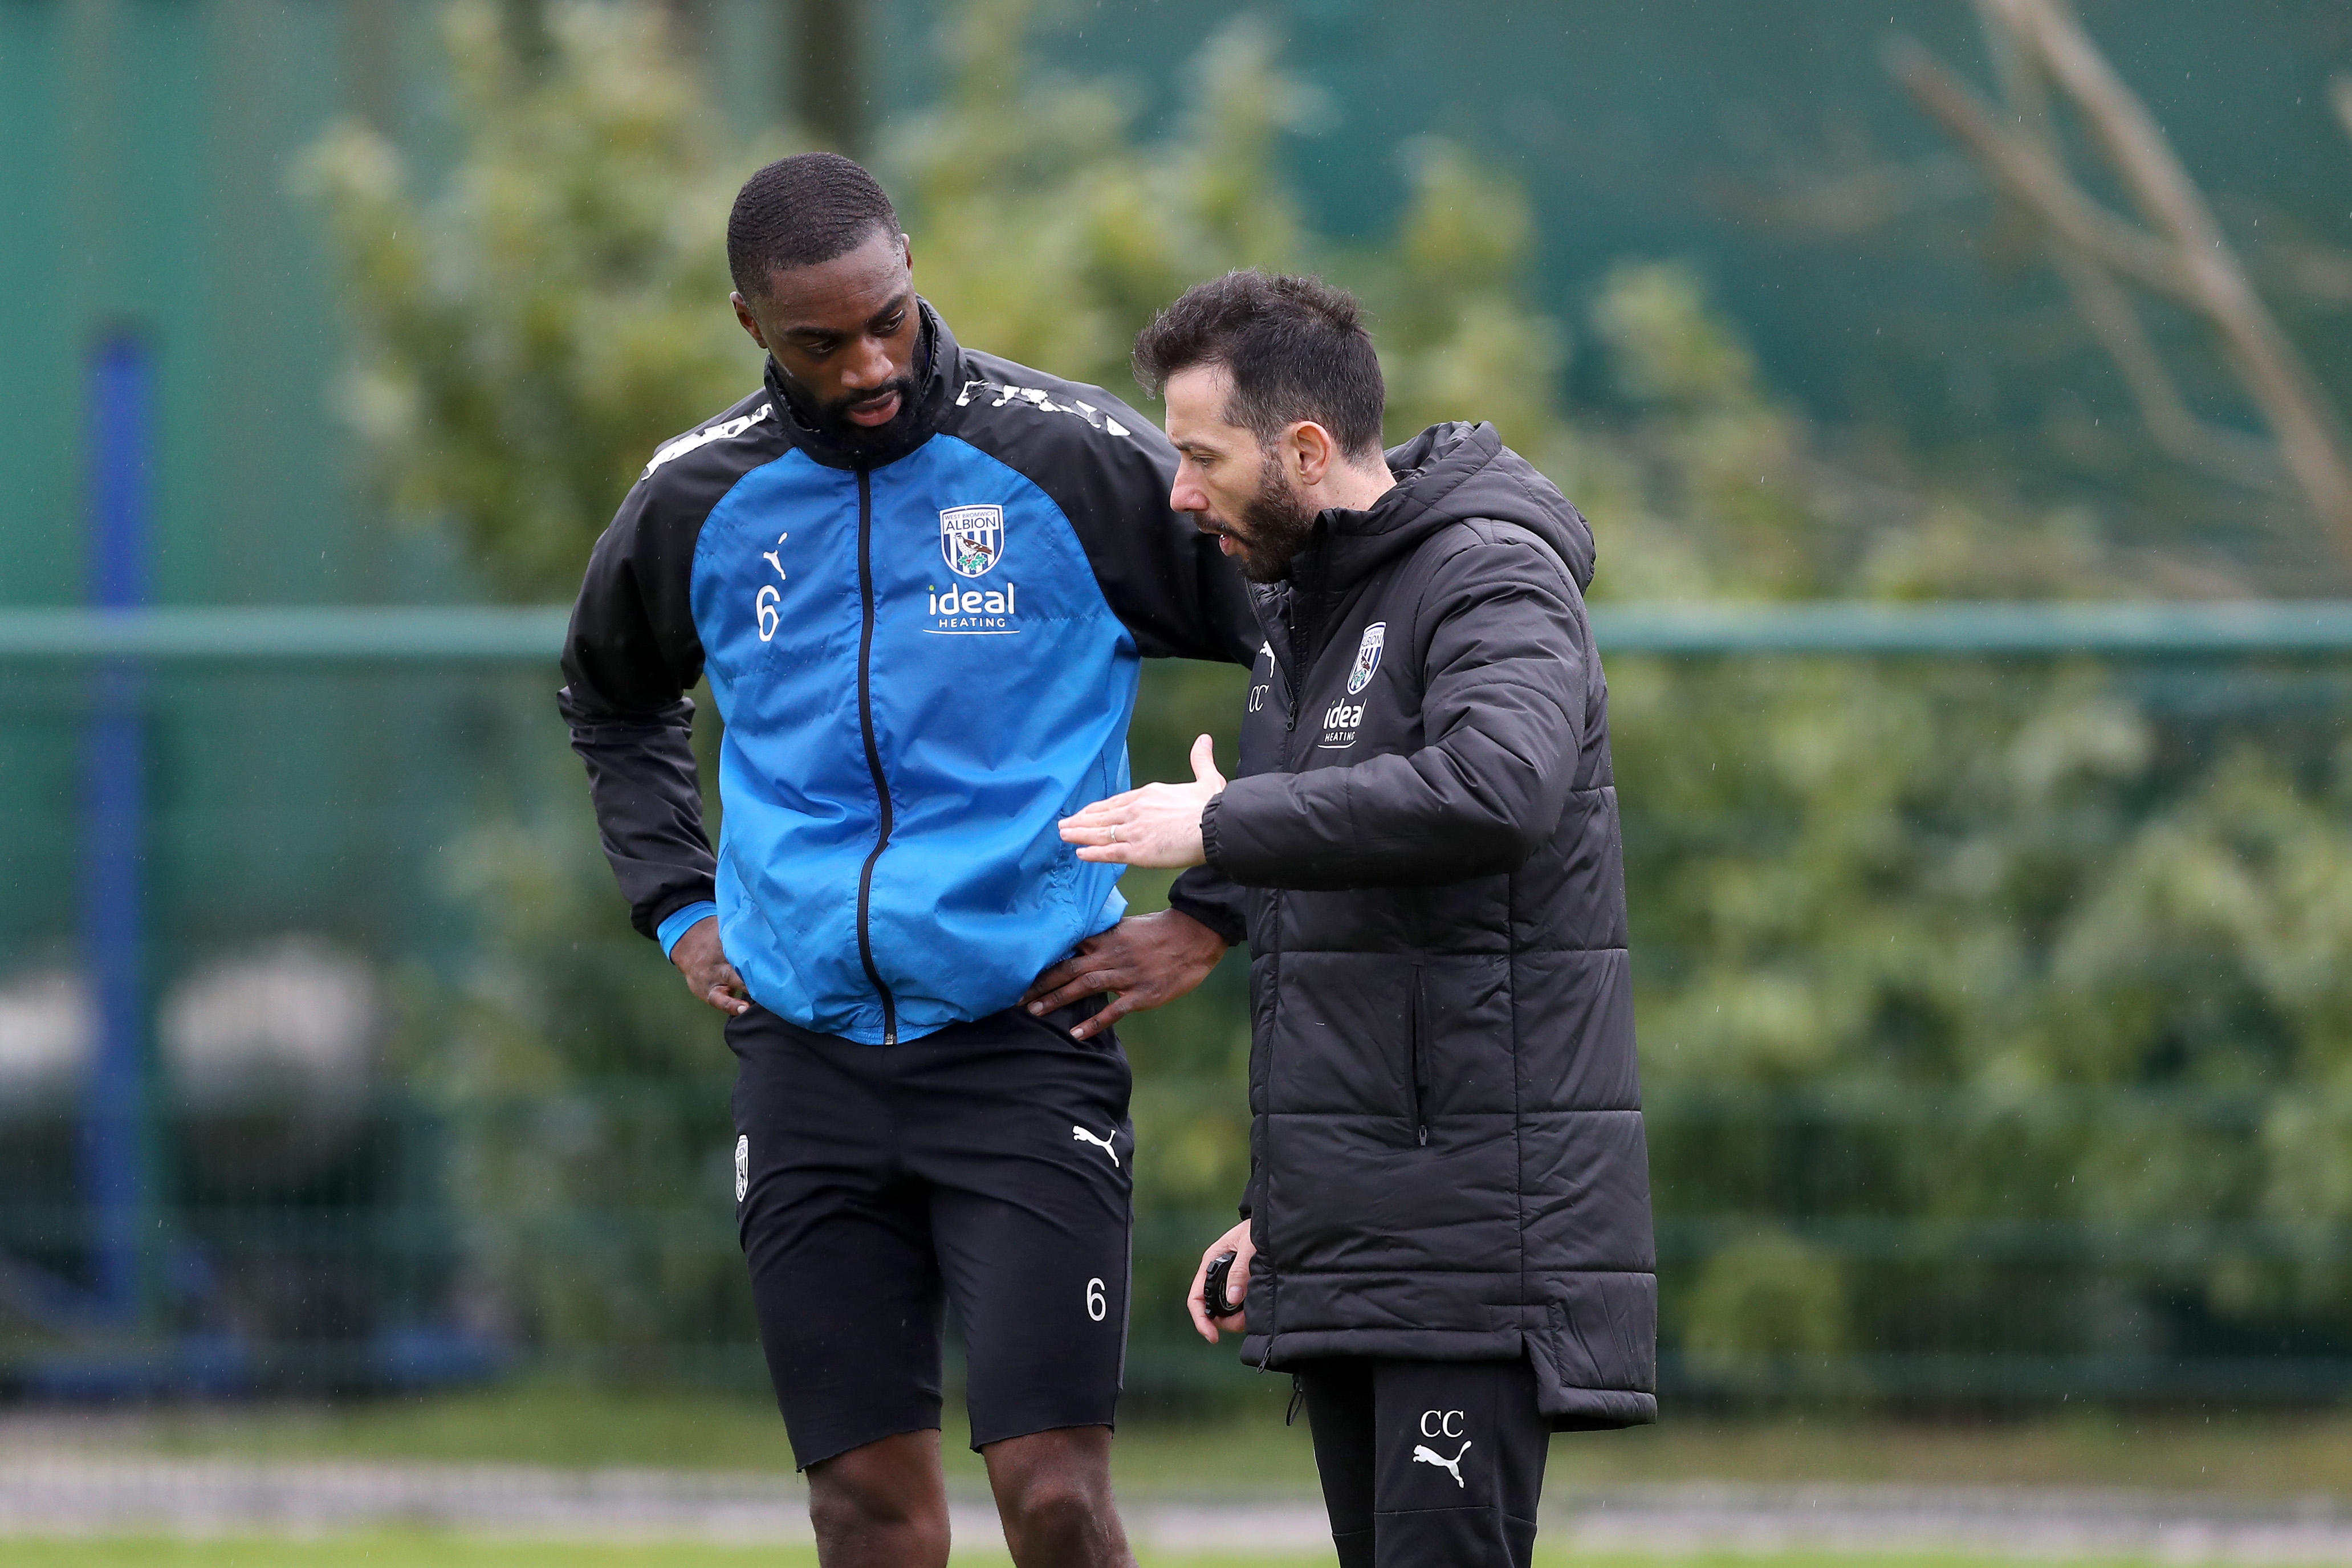 Carlos Corberán delivering information to Semi Ajayi out on the training pitches